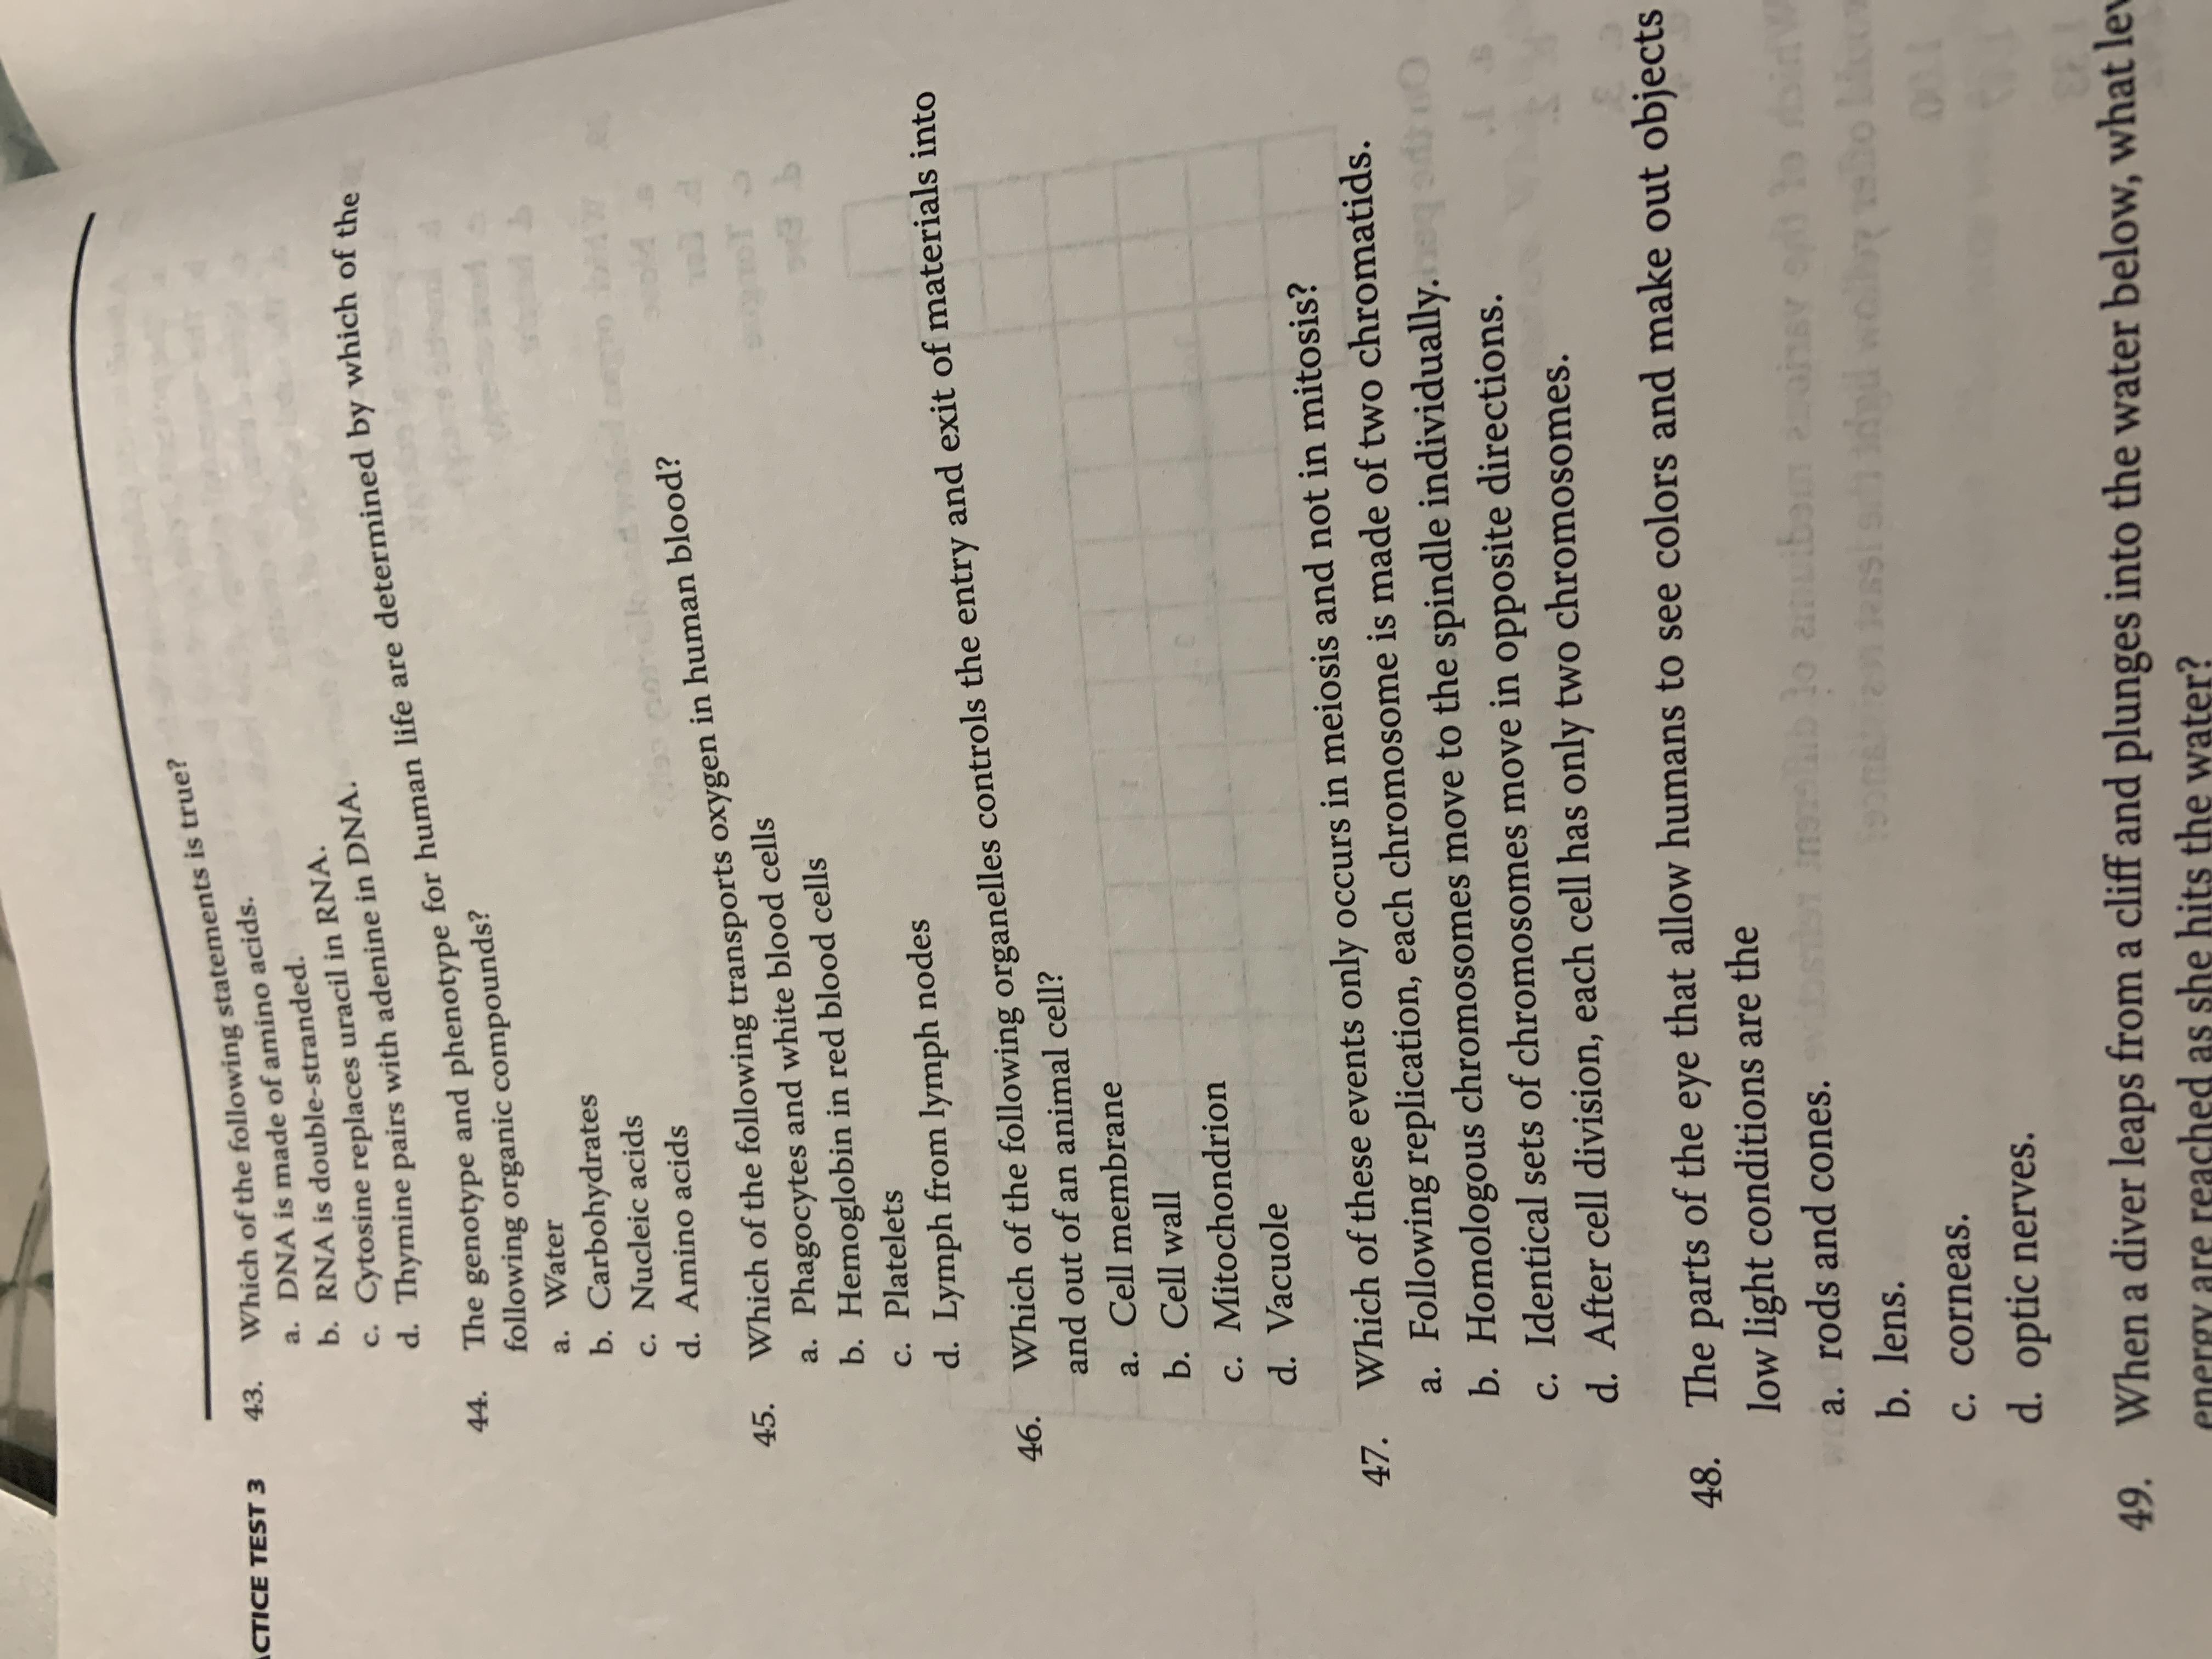 Hi, Can I Have Help With Number 45? Thank You 